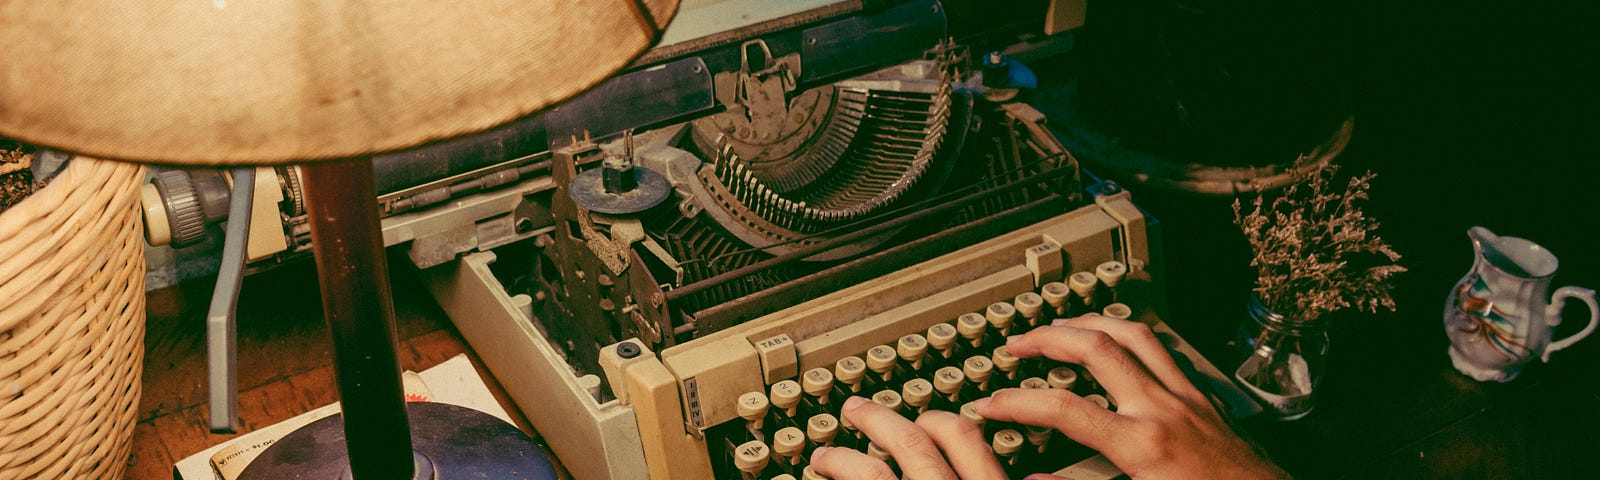 Two hands on an old typewriter, writing at a small, cluttered desk.